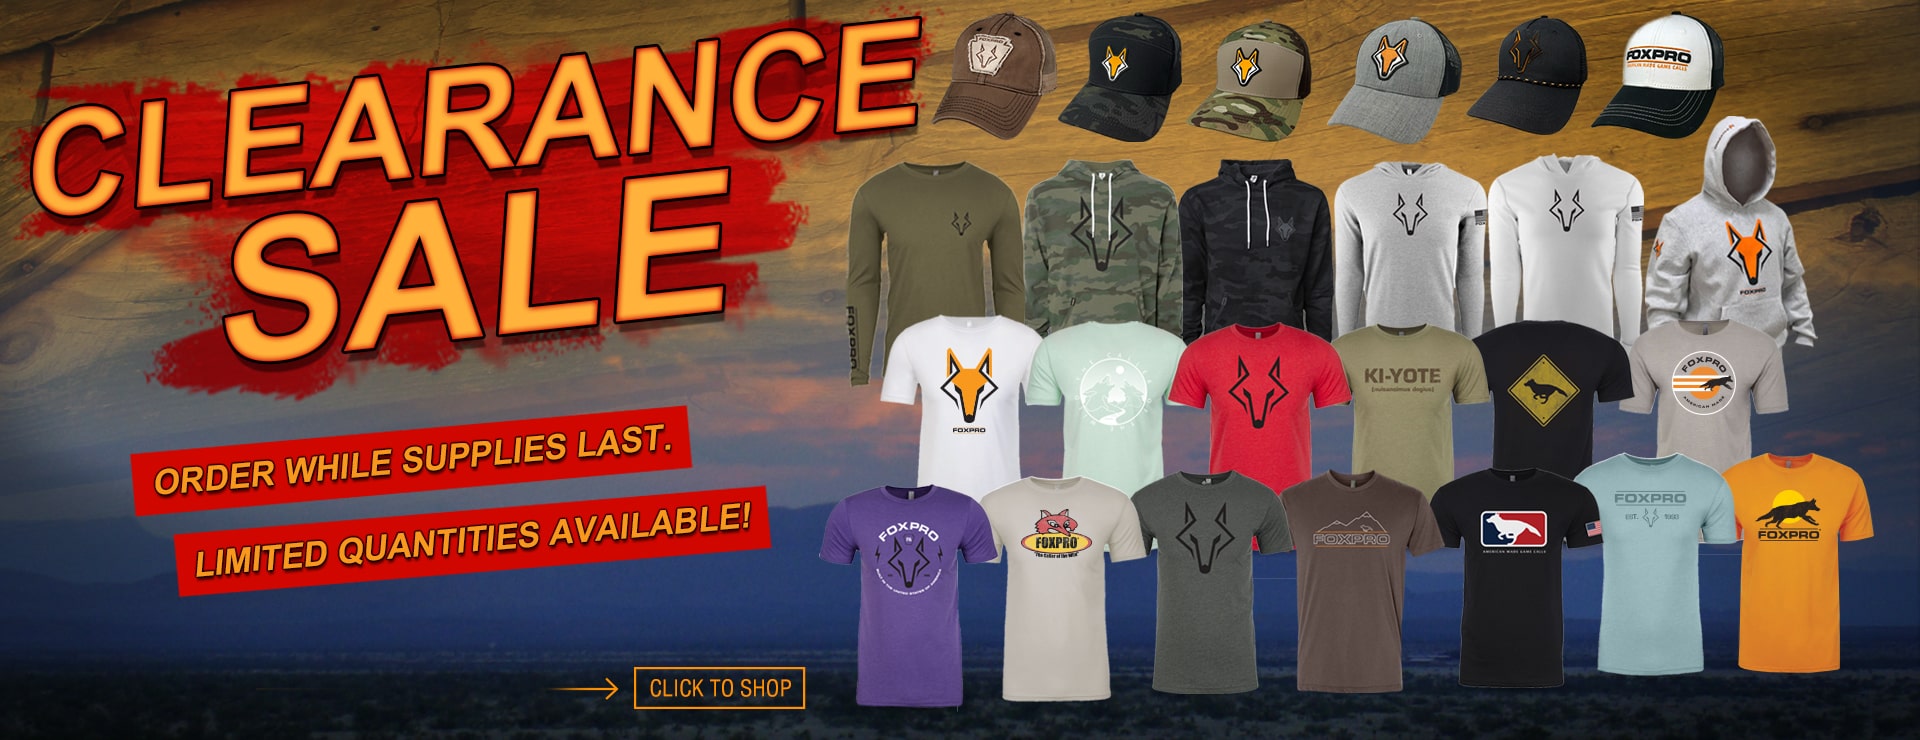 FOXPRO Clearance Sale 